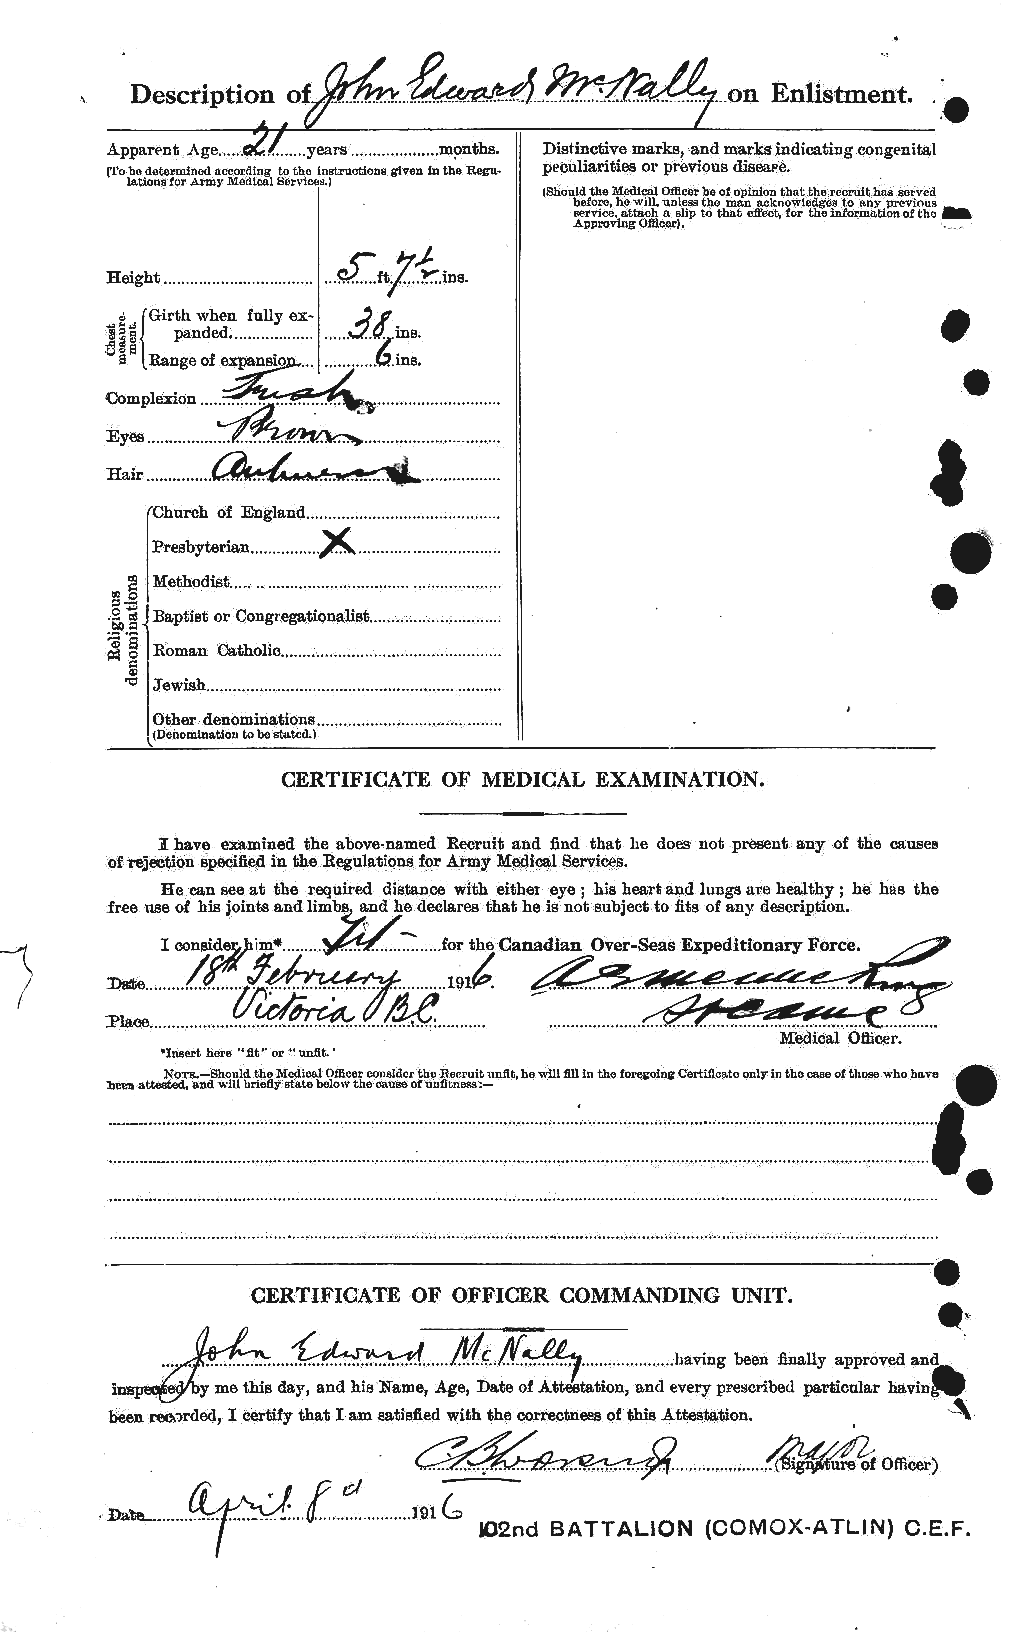 Personnel Records of the First World War - CEF 538157b